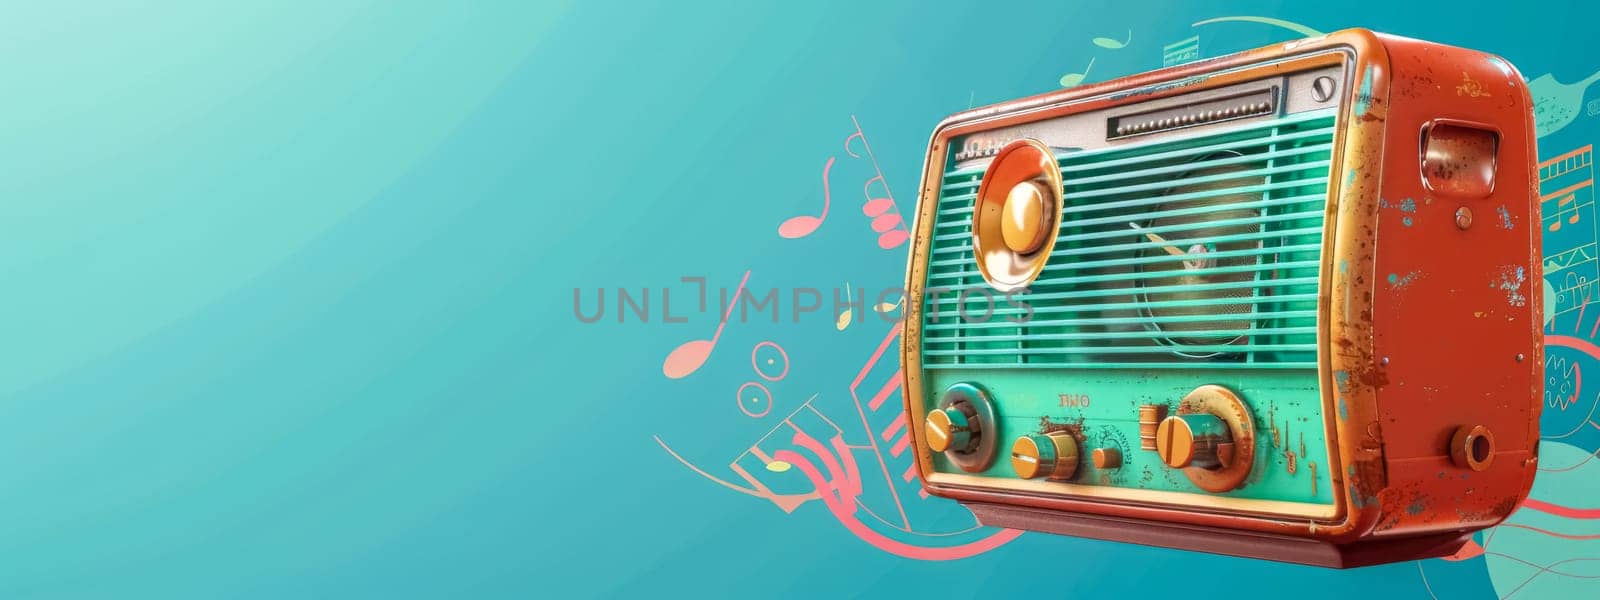 Vintage radio on abstract background, copy space by Edophoto